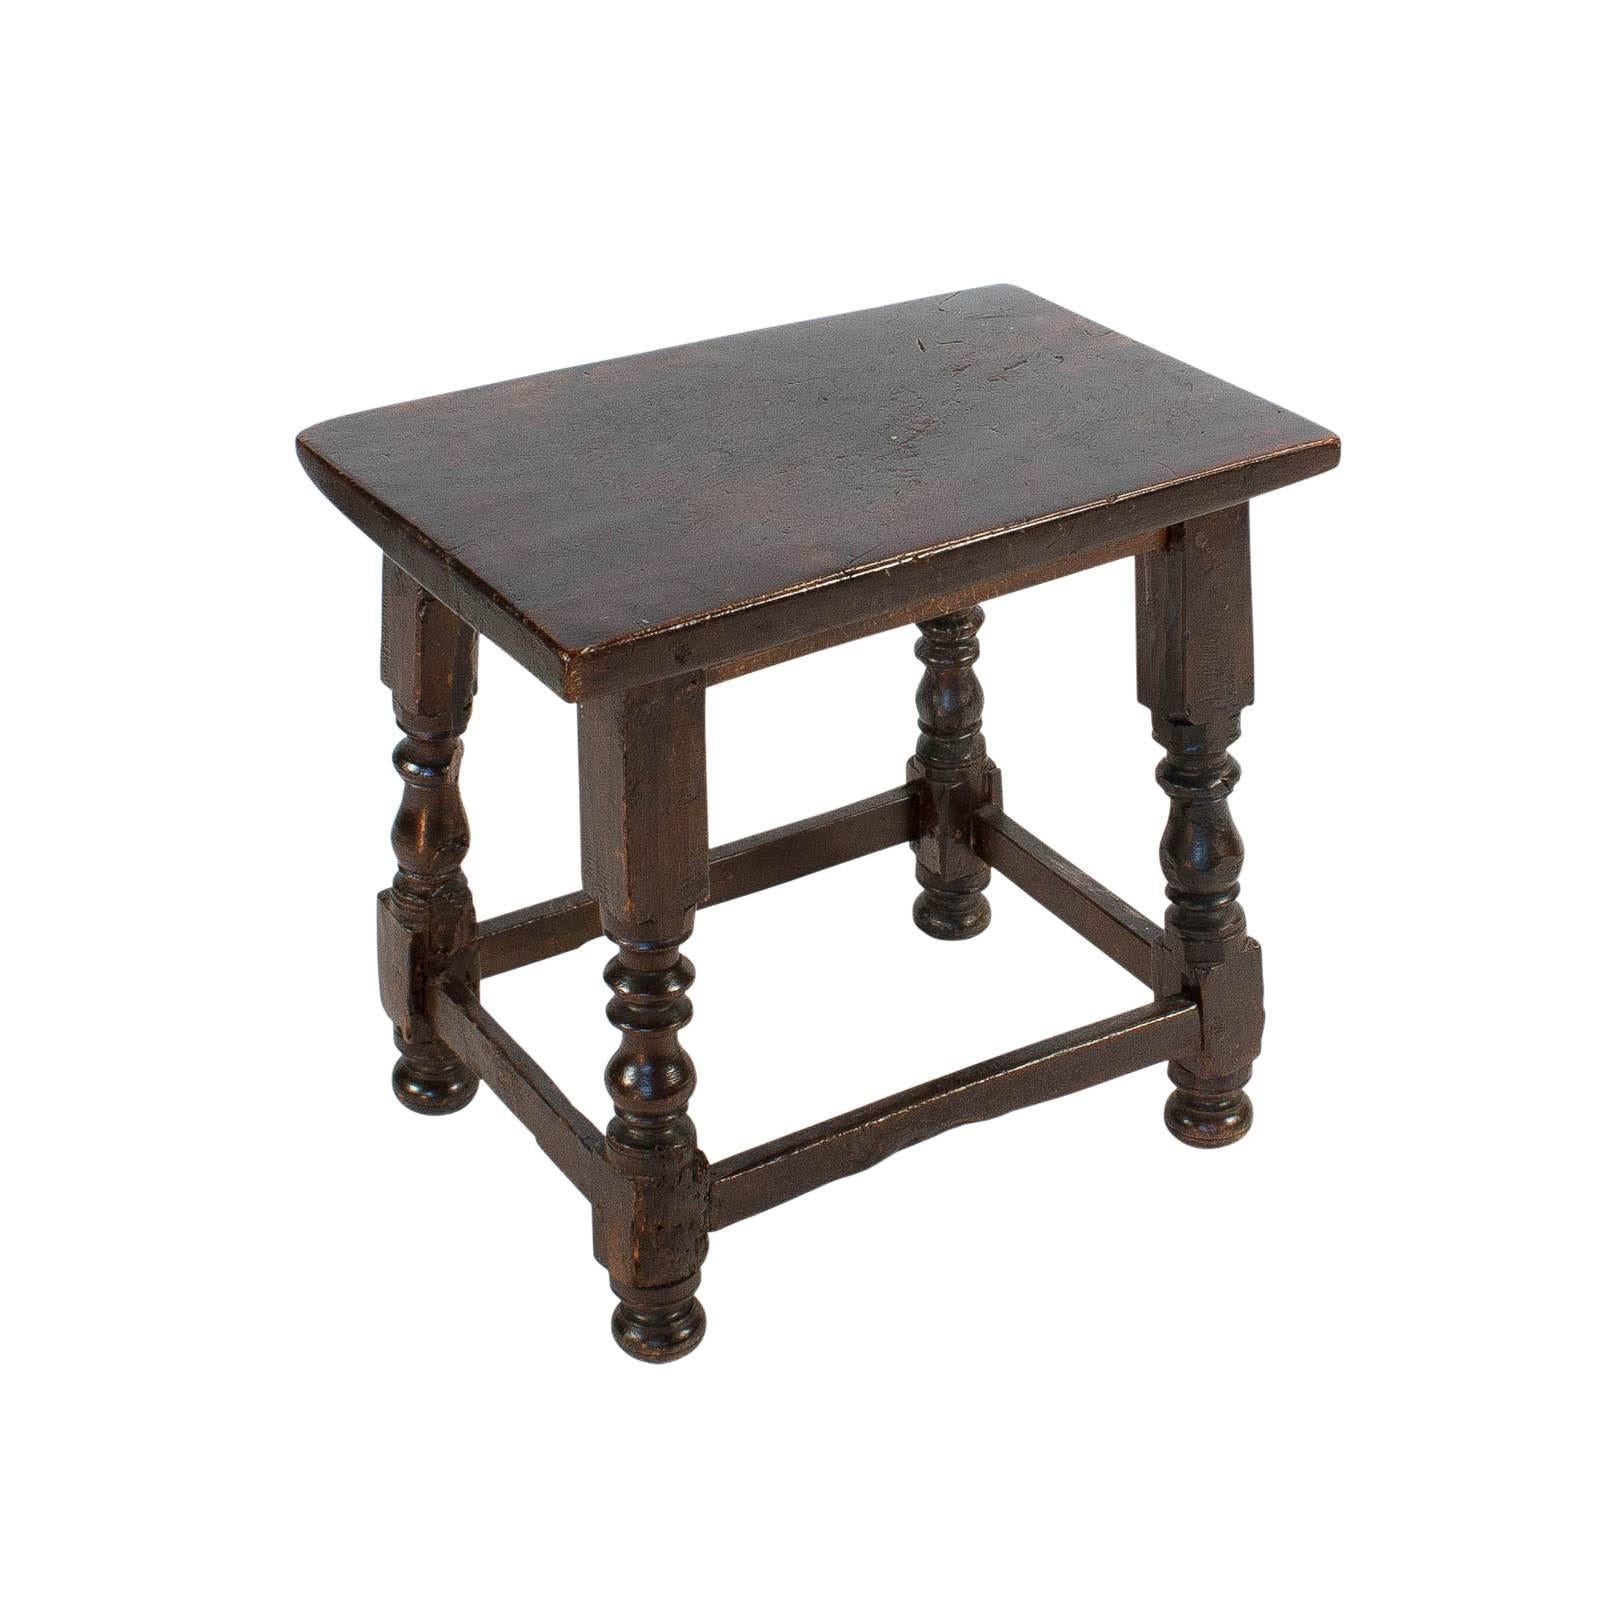 A handsome rustic walnut stool in the Baroque manner made in the country side in the 19th century or earlier in Italy or Spain. These pieces are wonderful side tables or can be used for seating. Lots of wear and patina. We love the quirky shape of